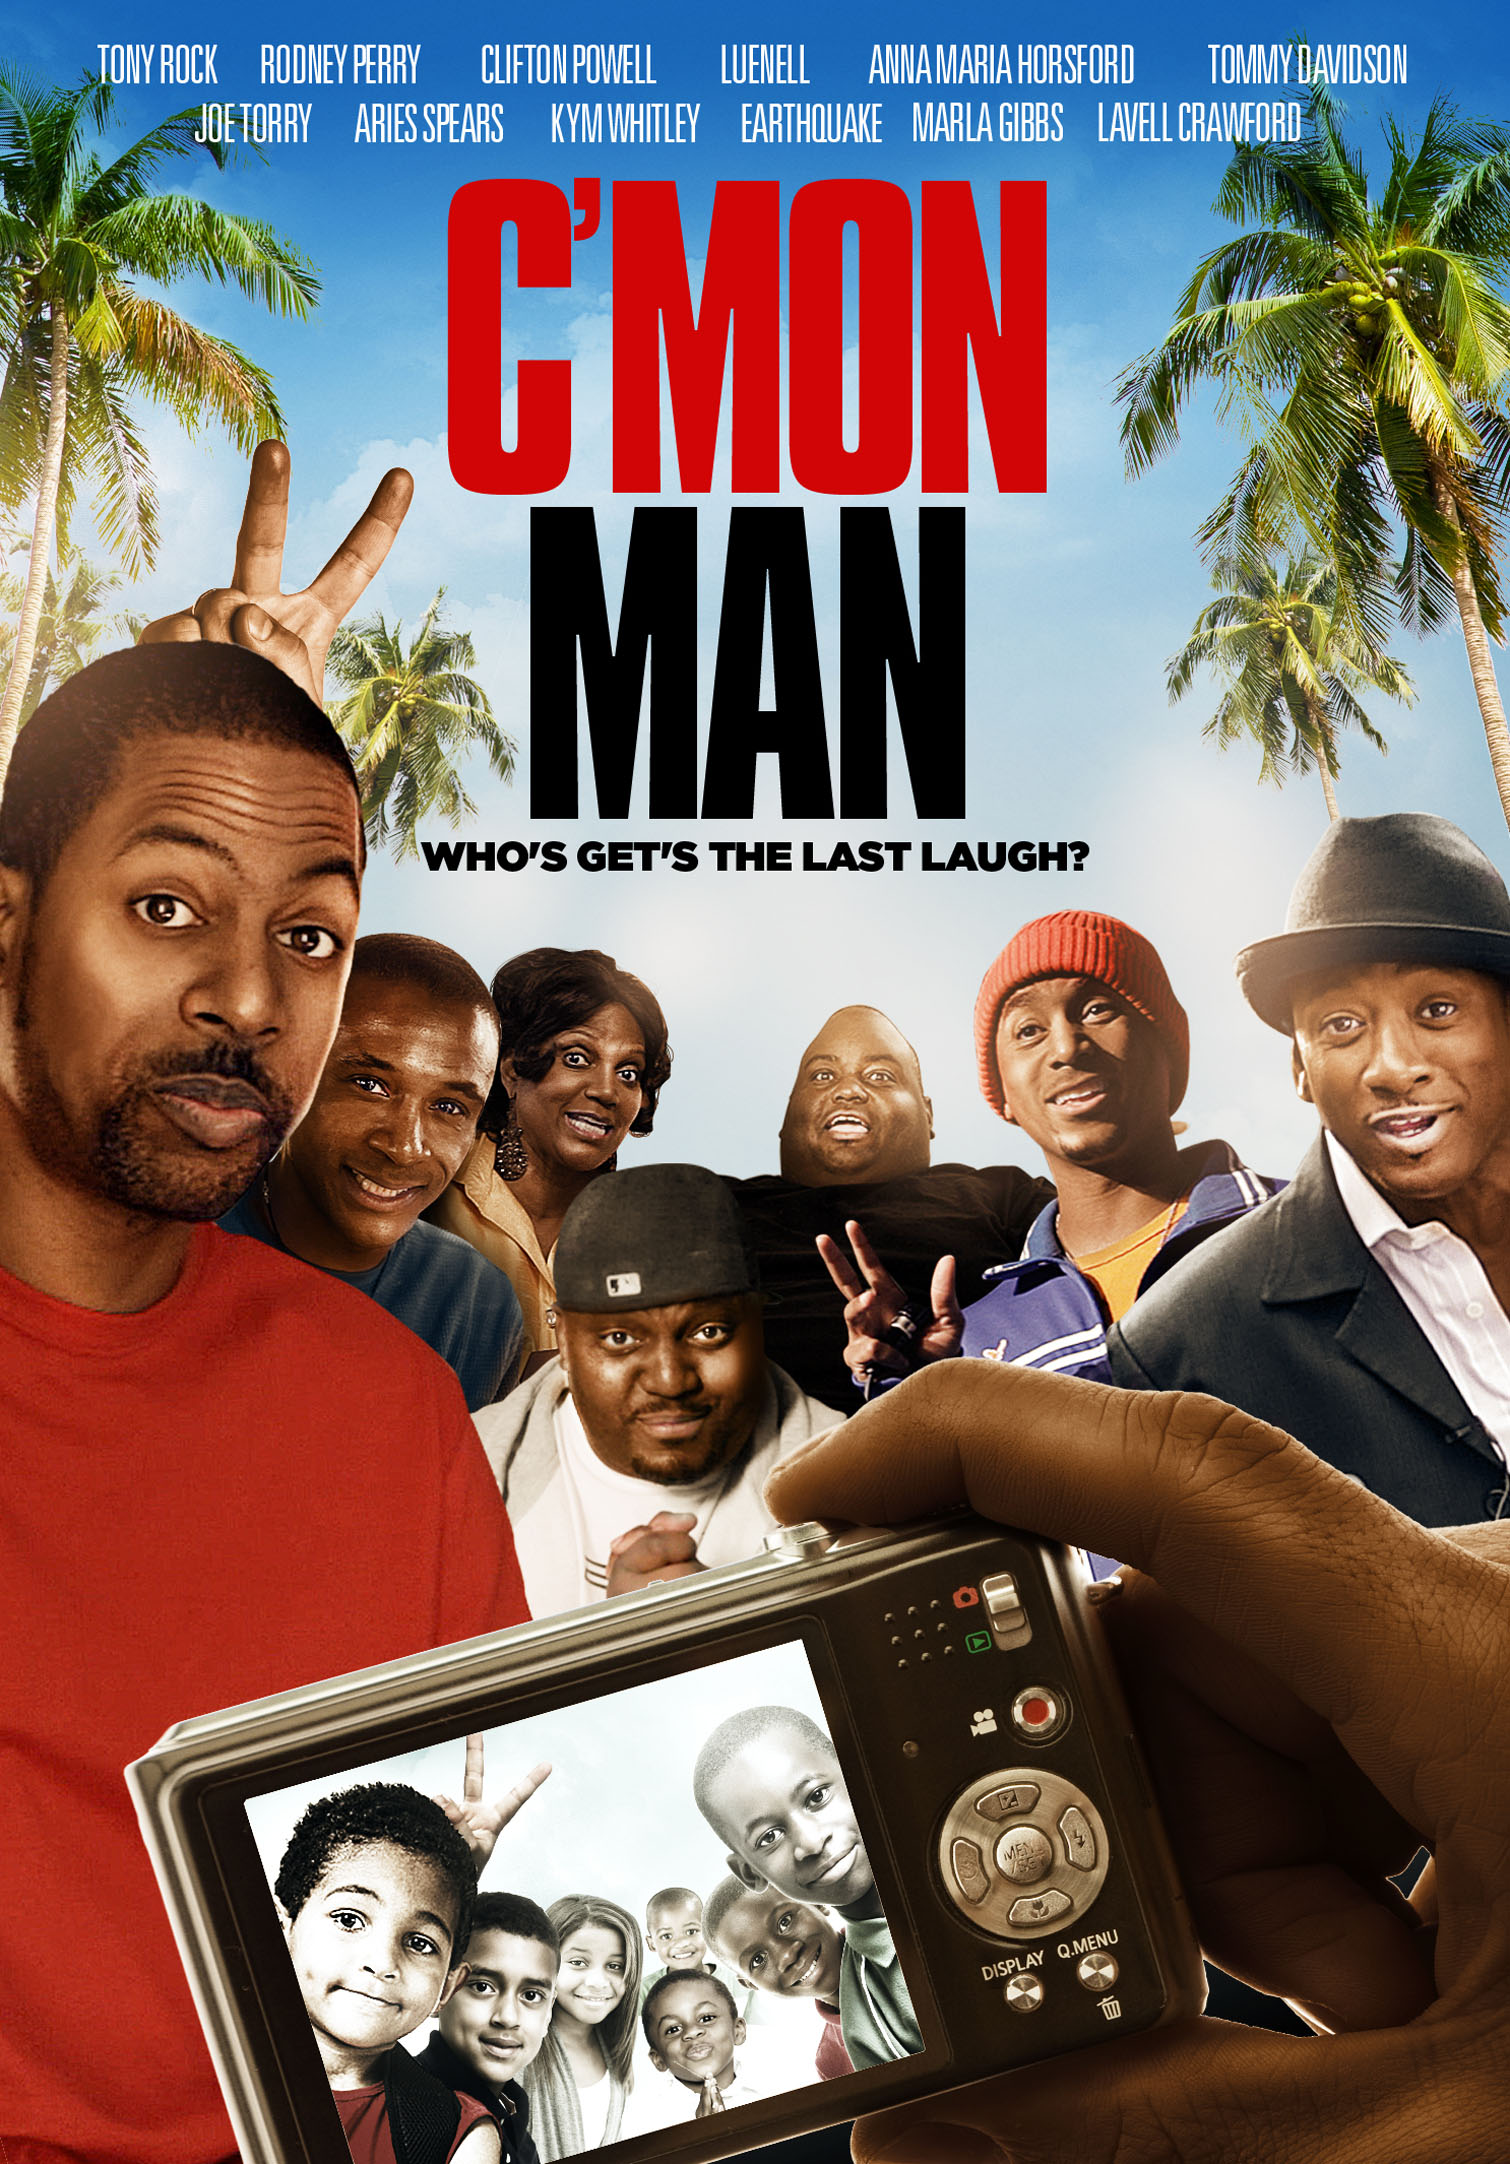 Tommy Davidson and Tony Rock in C'mon Man (2012)